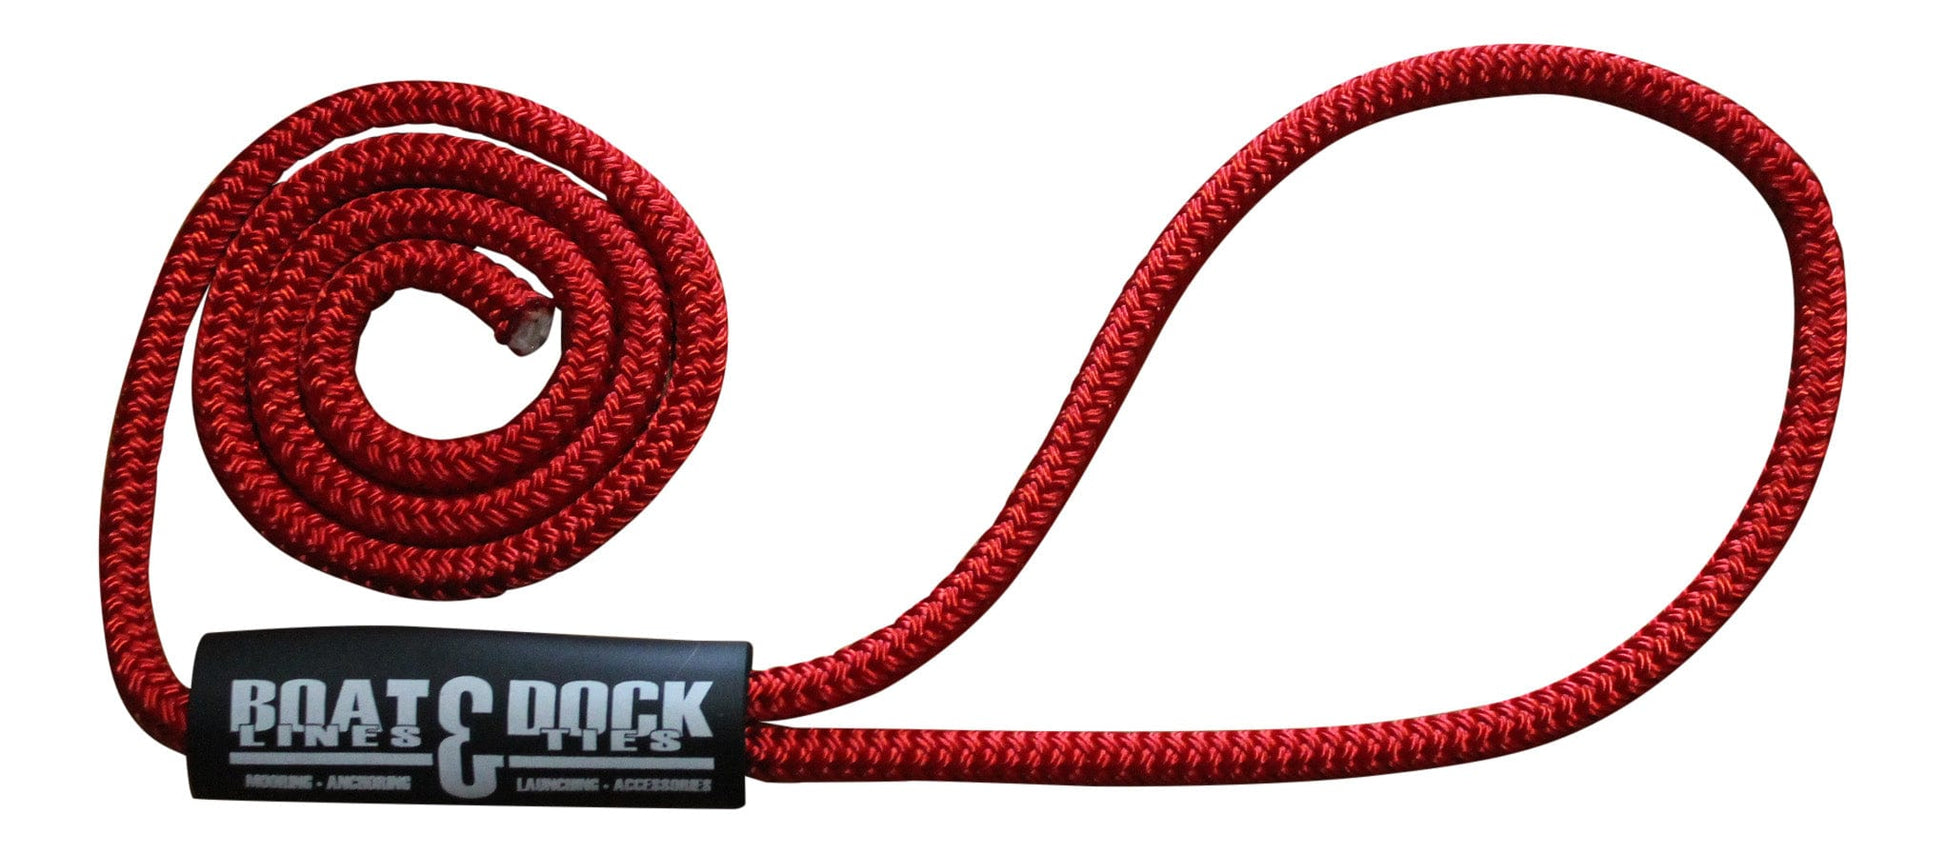 Boat Dock Fender Line - Premium Double Braided Nylon Rope, Made in USA- 2 pack - Boat Lines & Dock Ties Boat Lines & Dock Ties 4 Feet / Red